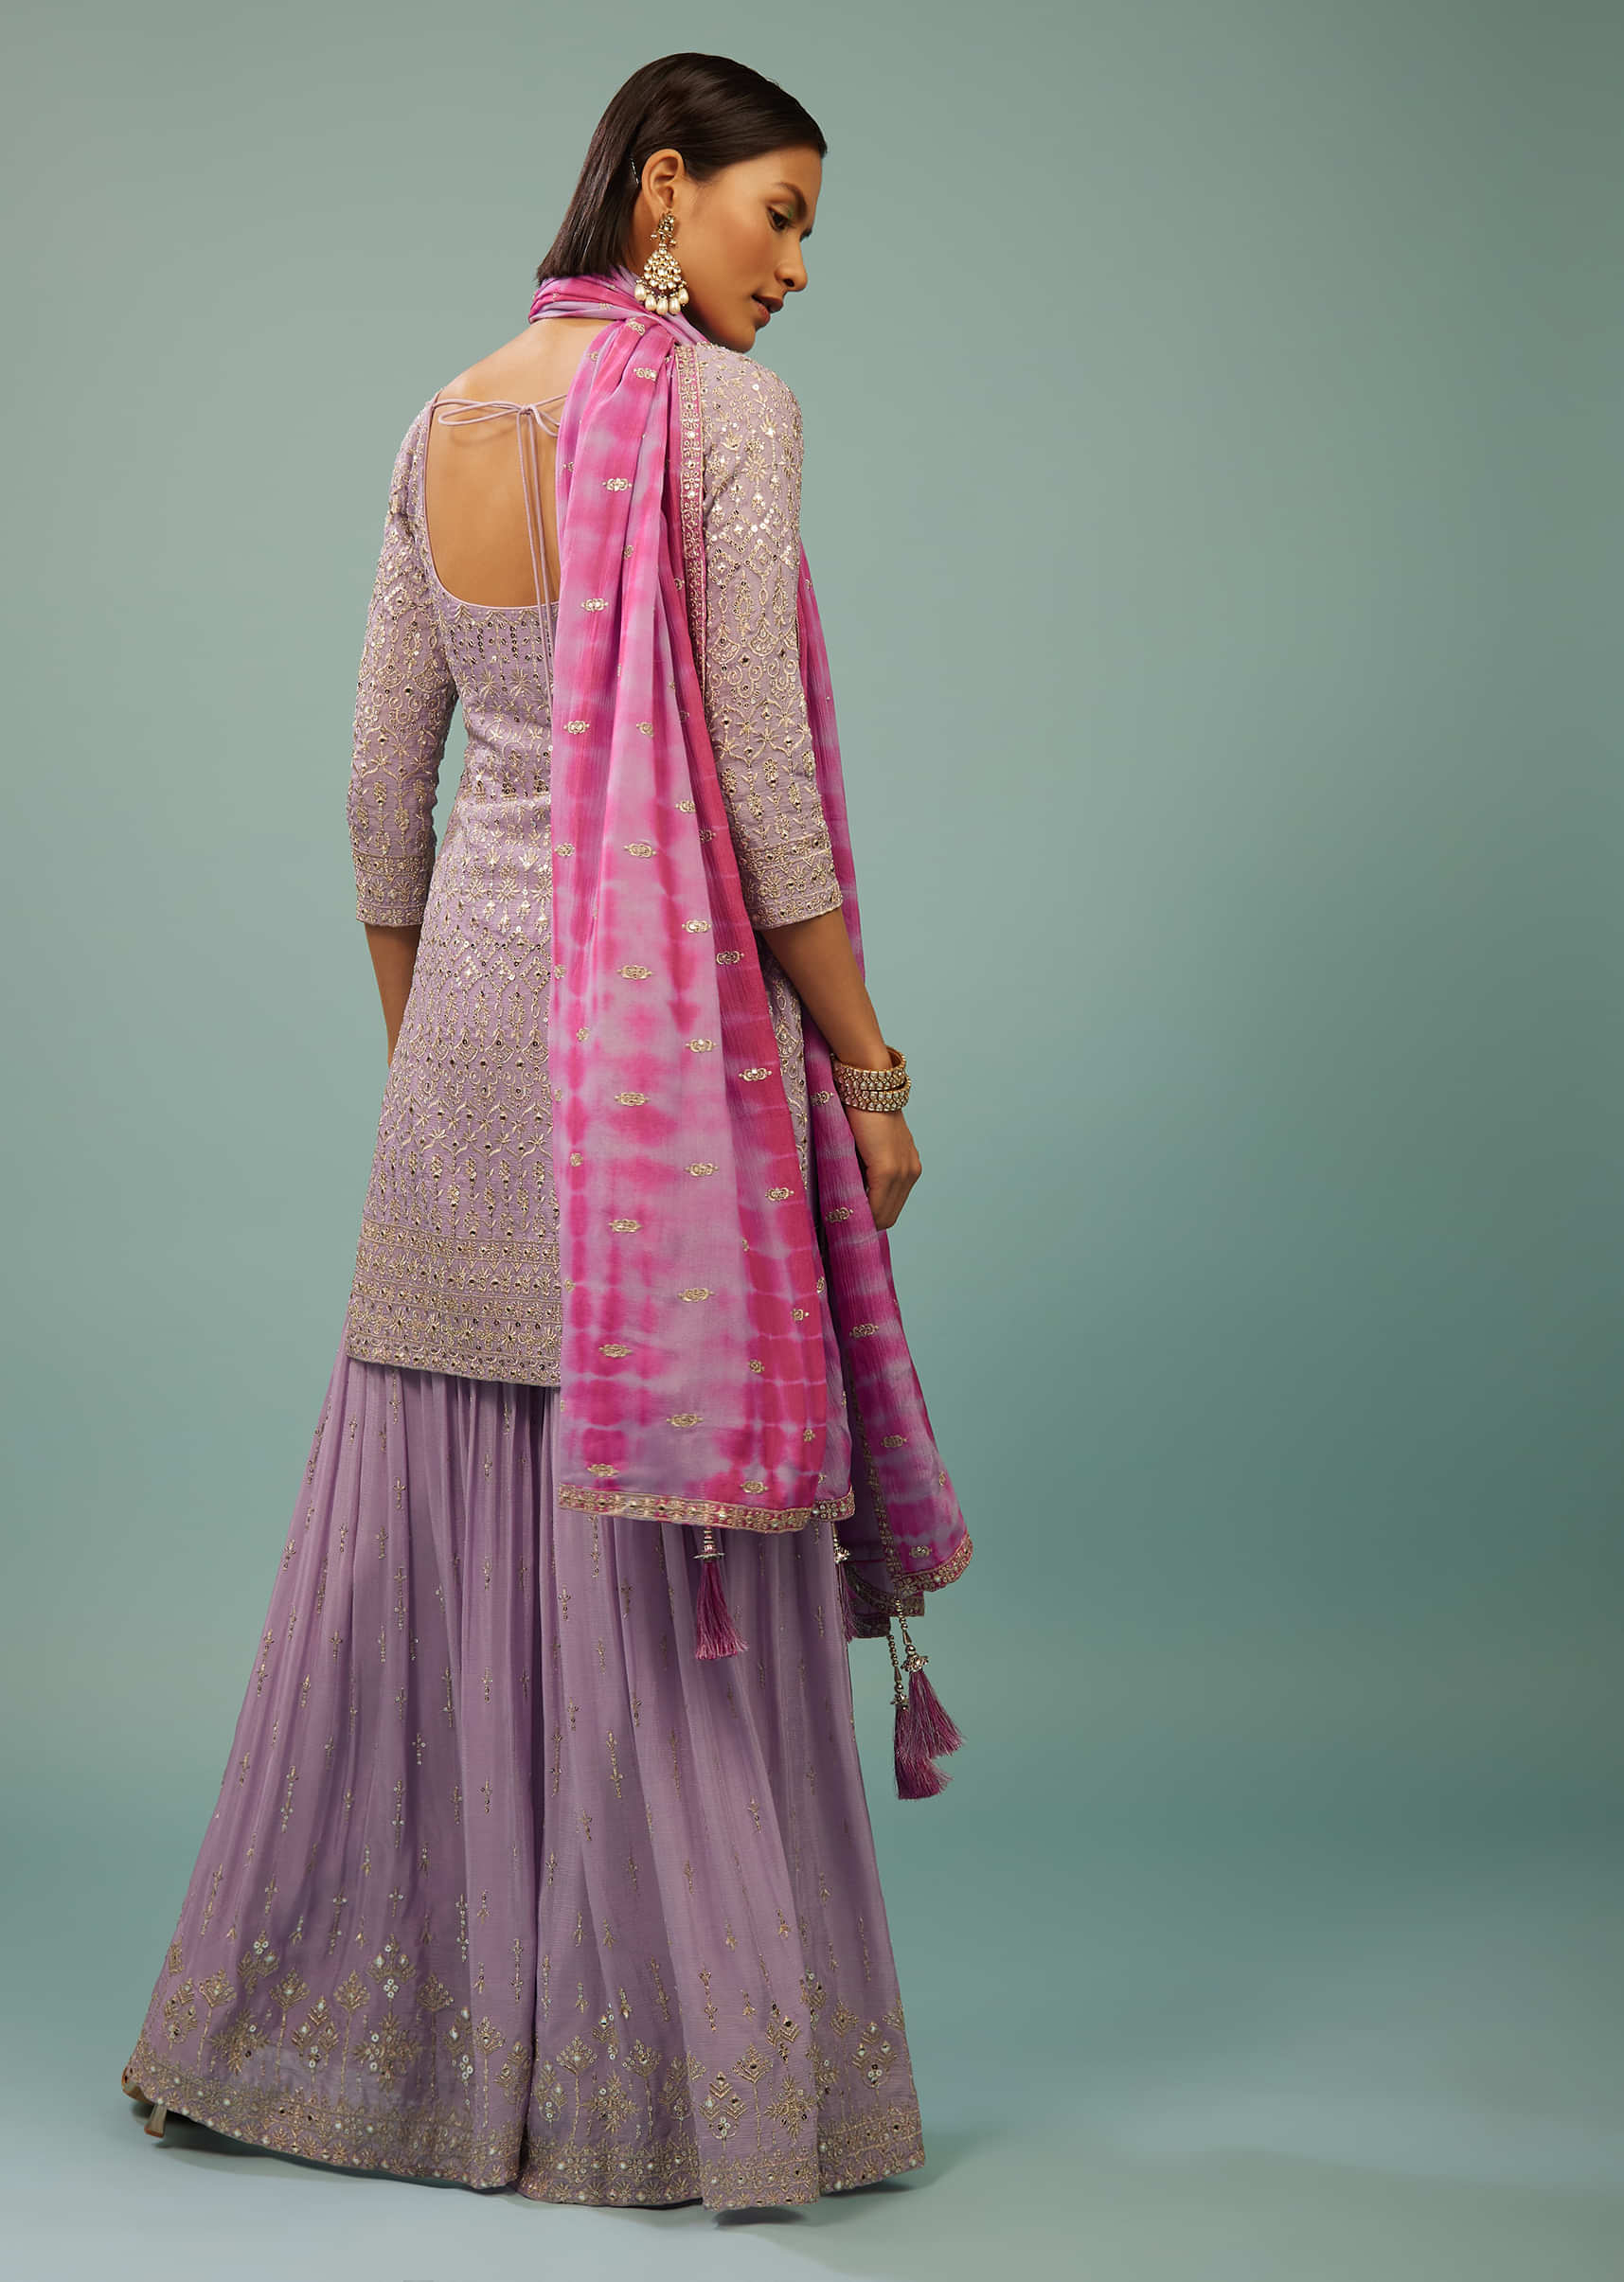 Lavender Purple Sharara Suit With Embroidery And Tie-Dye Dupatta